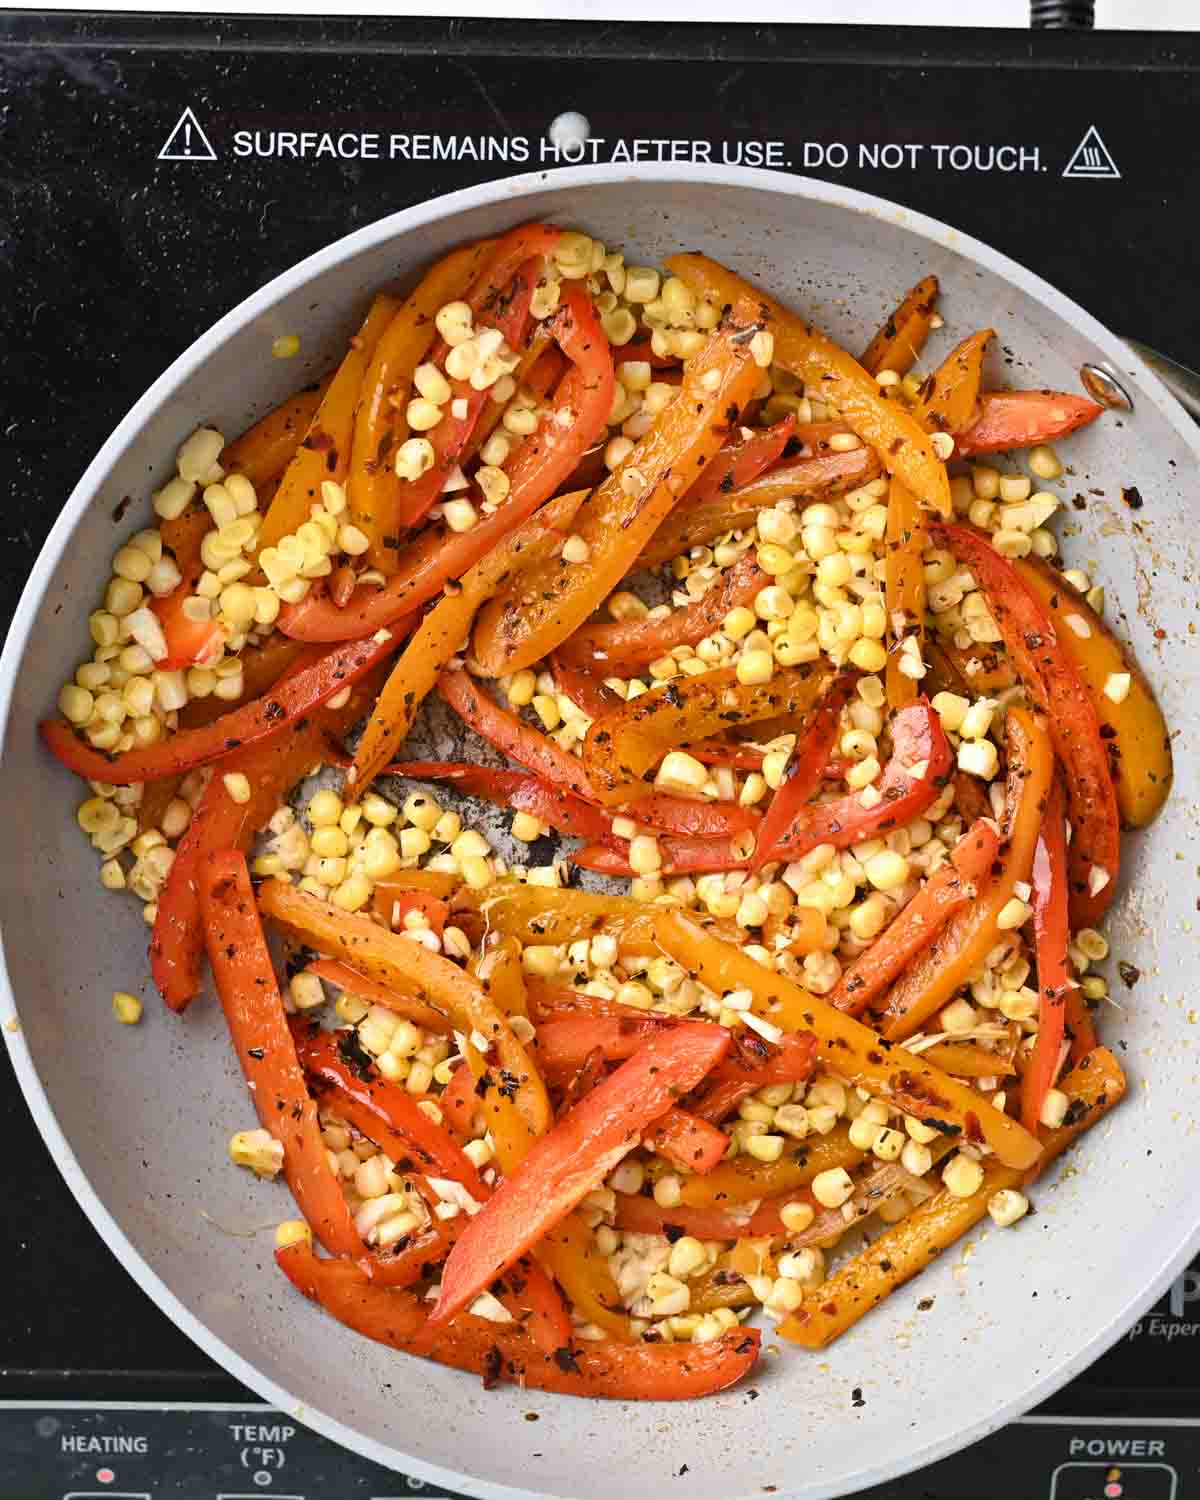 Corn, garlic, and peppers in a gray skillet.